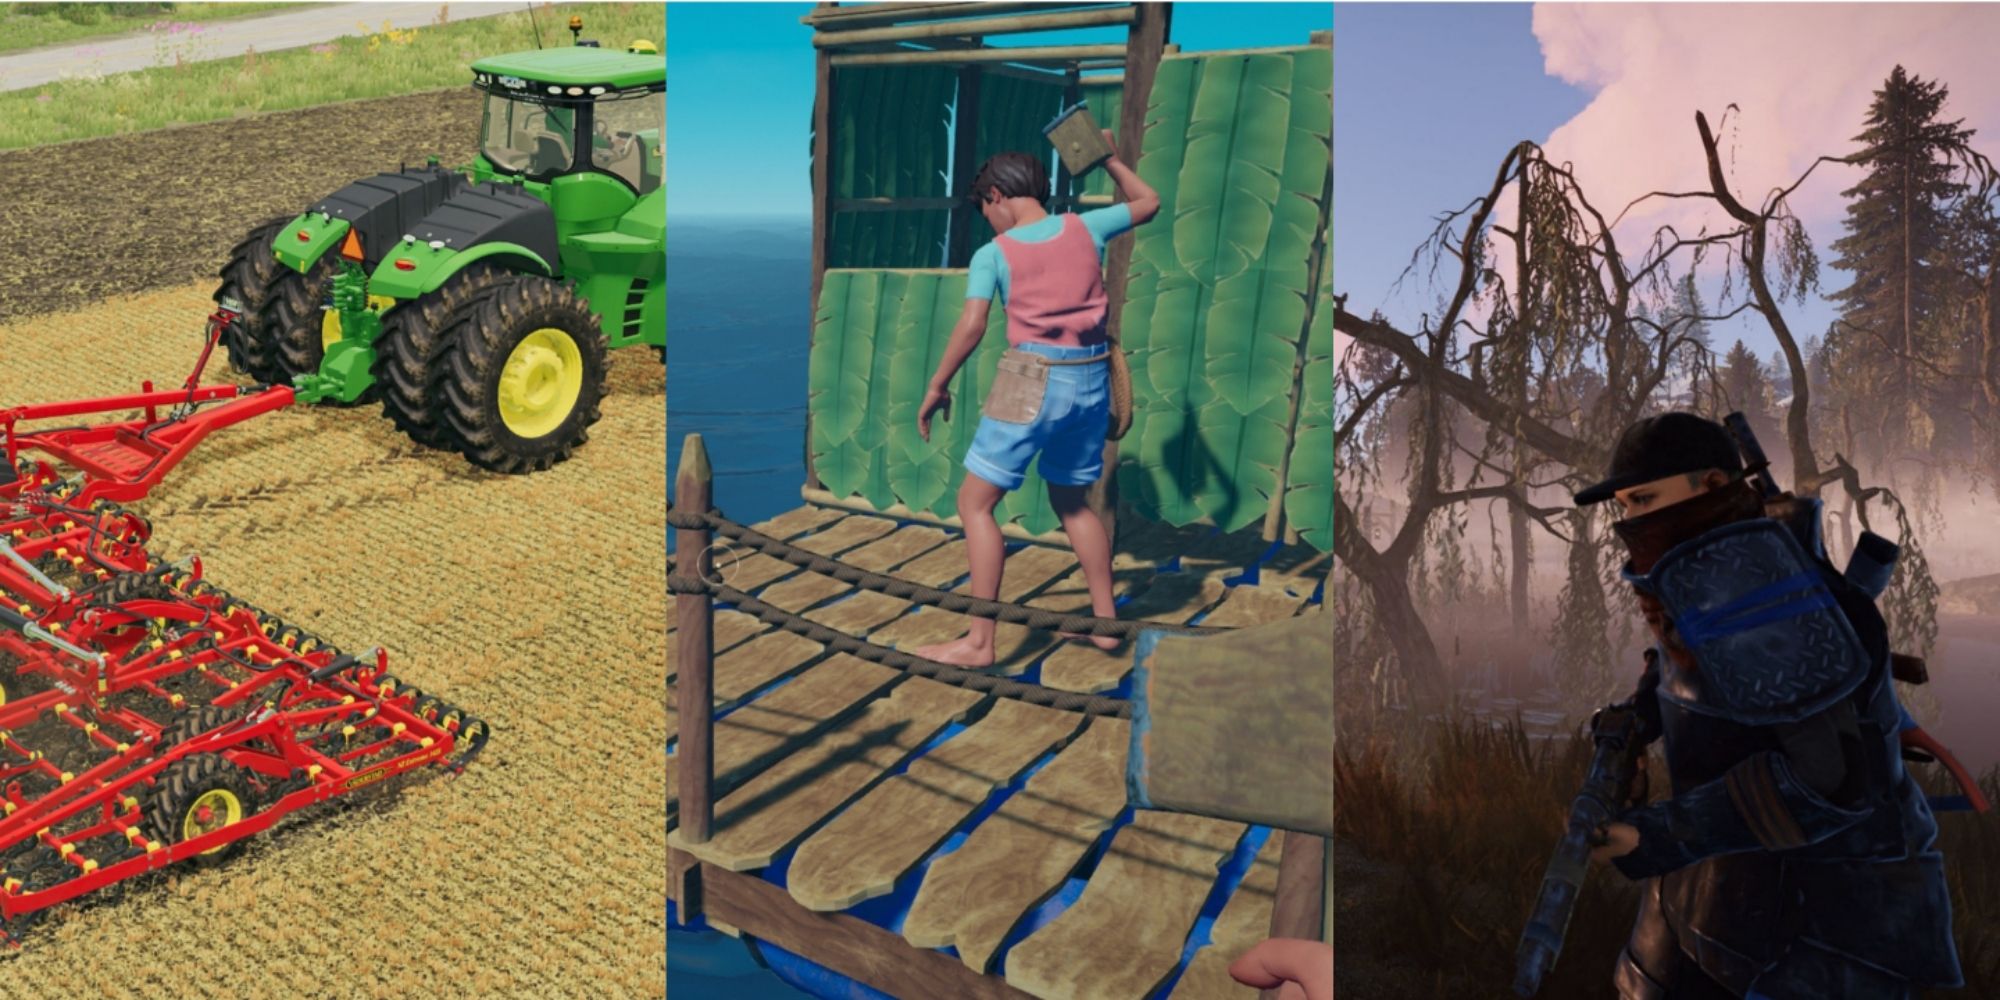 A tractor harvesting a field, a person building a raft, and a person holding a gun